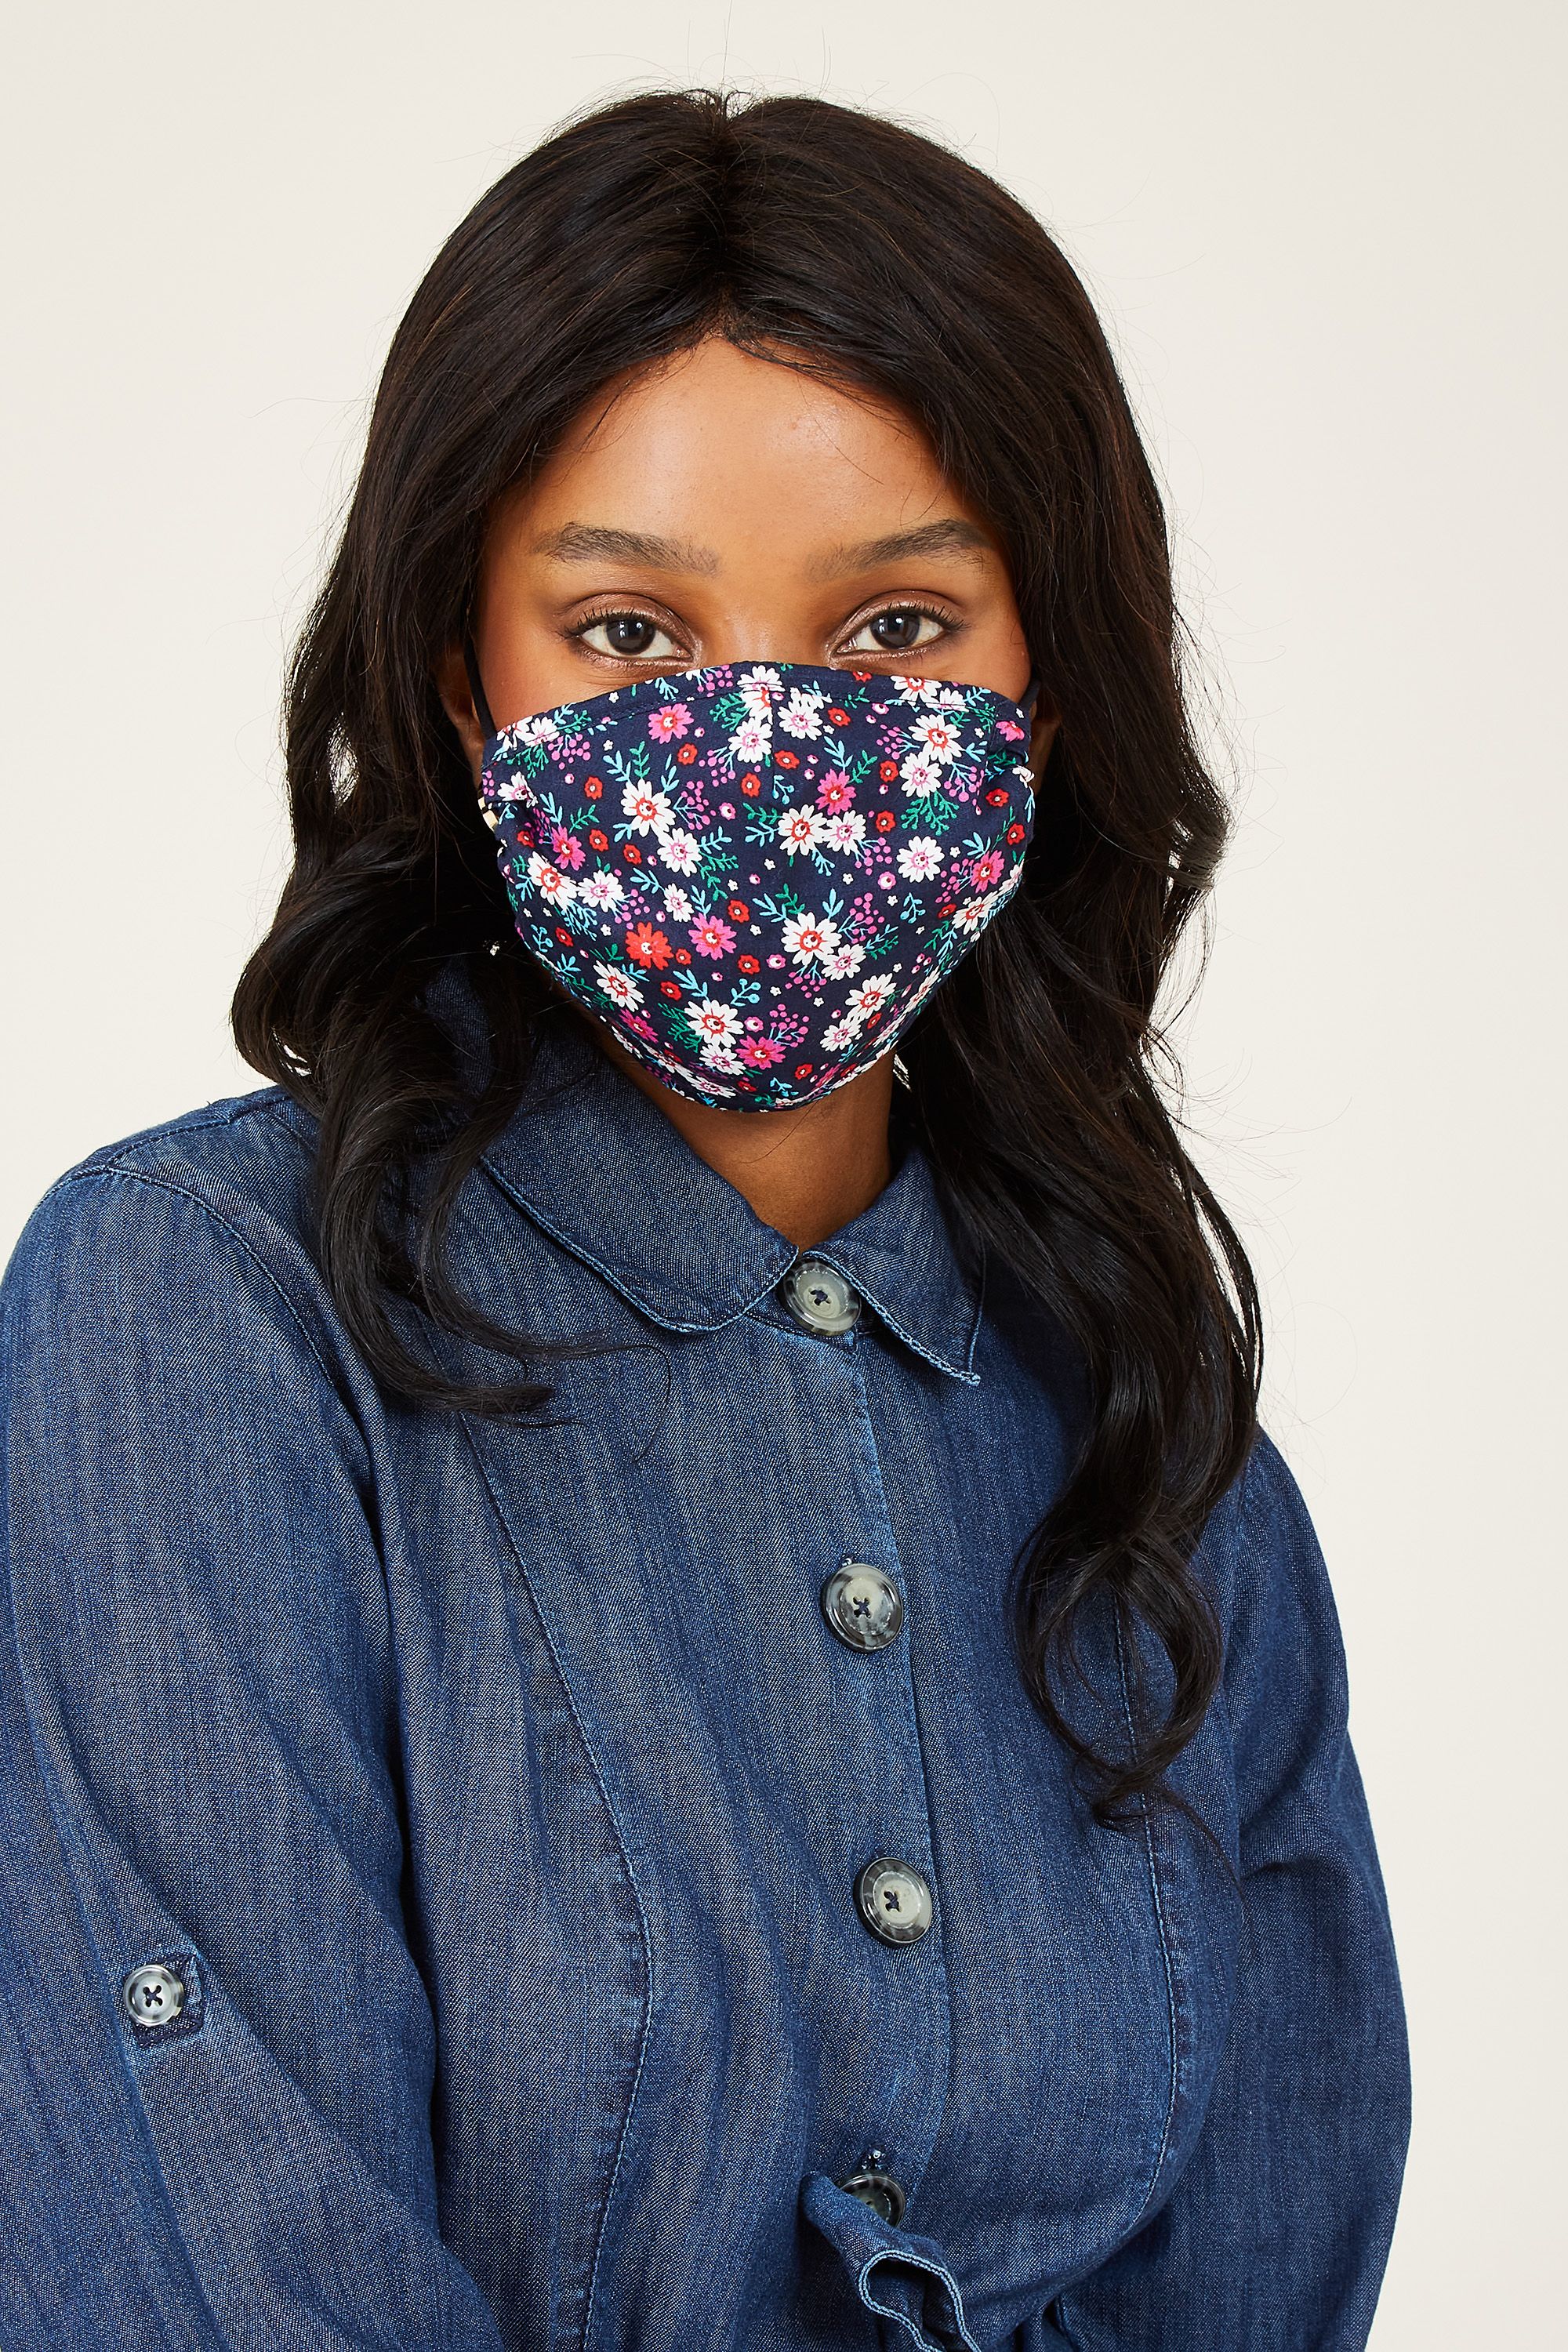 With a fun floral print, this Ditsy Daisy Face Covering is both comfortable and soft. It's made from the end of our fabric rolls, so it's sustainable and kind to the planet.Please remember it is a non-medical mask and not PPE. Wash your hands before and after putting on the covering. One Pound from each covering is donated to Sufra, a charity that supports and provides food for people in extreme poverty.  100% Cotton, Lining:100% Cotton